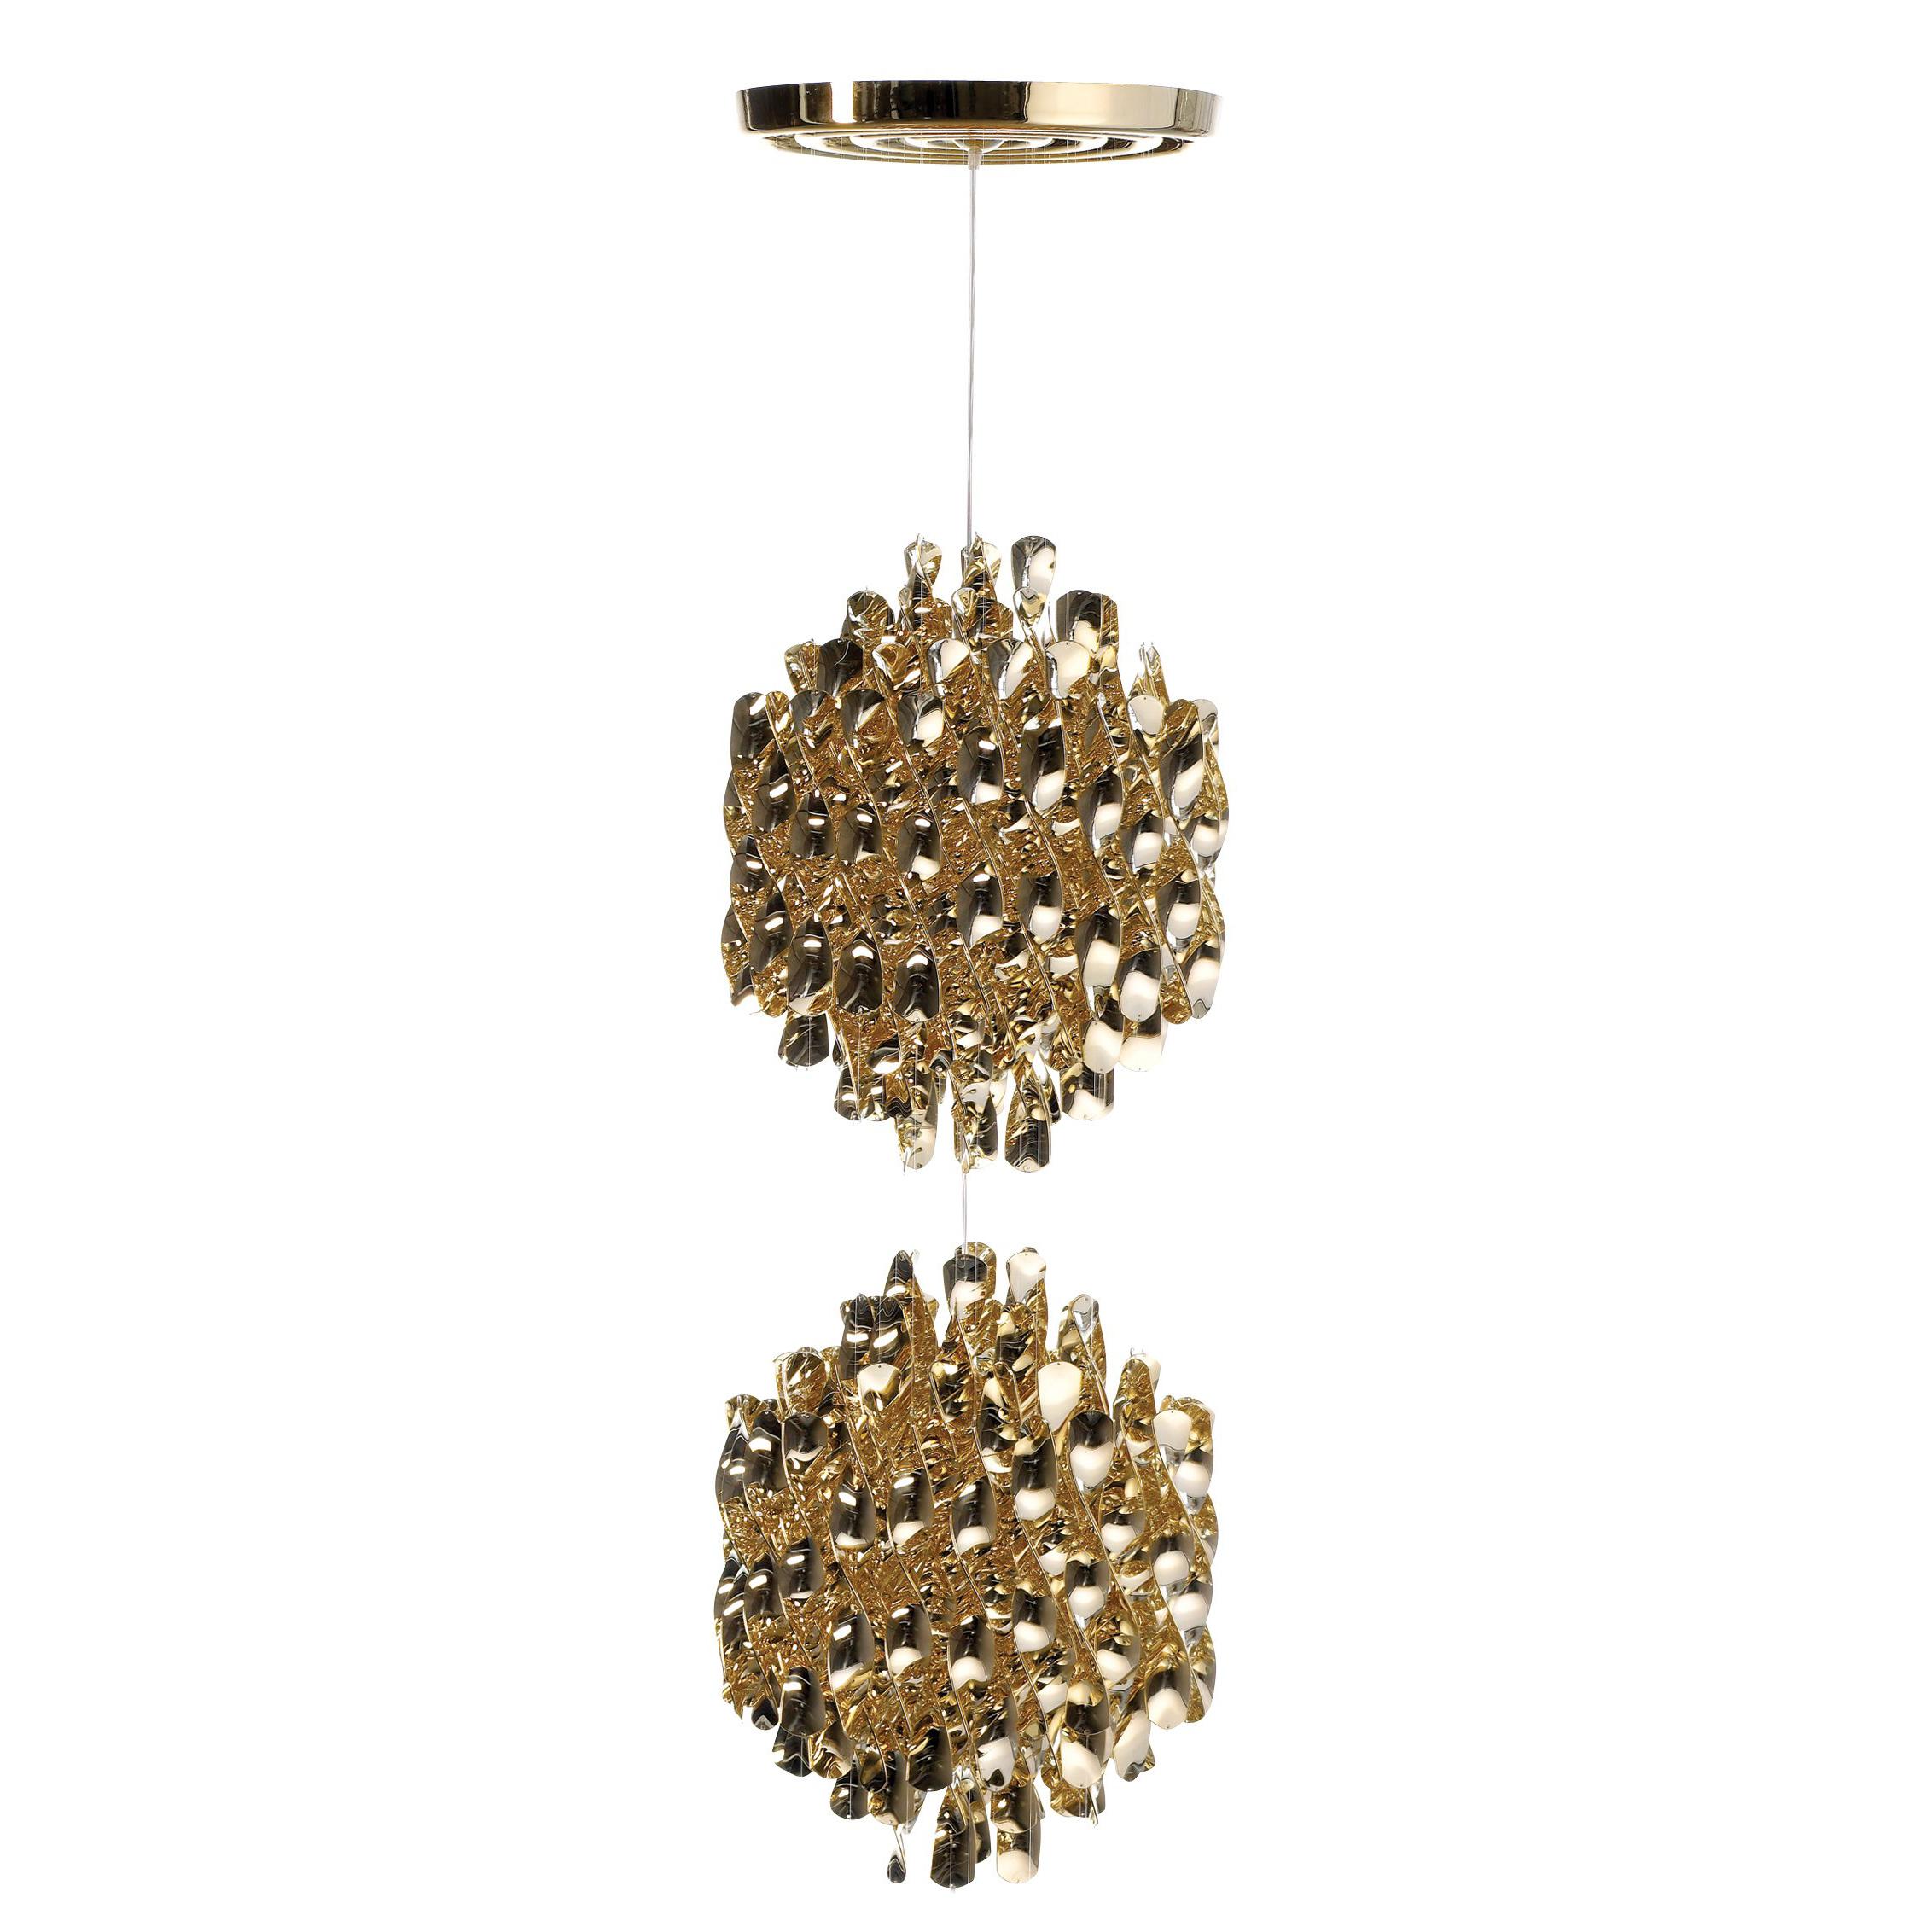 Spiral SP2 Pendant Light with Gold Finish by Verner Panton For Sale